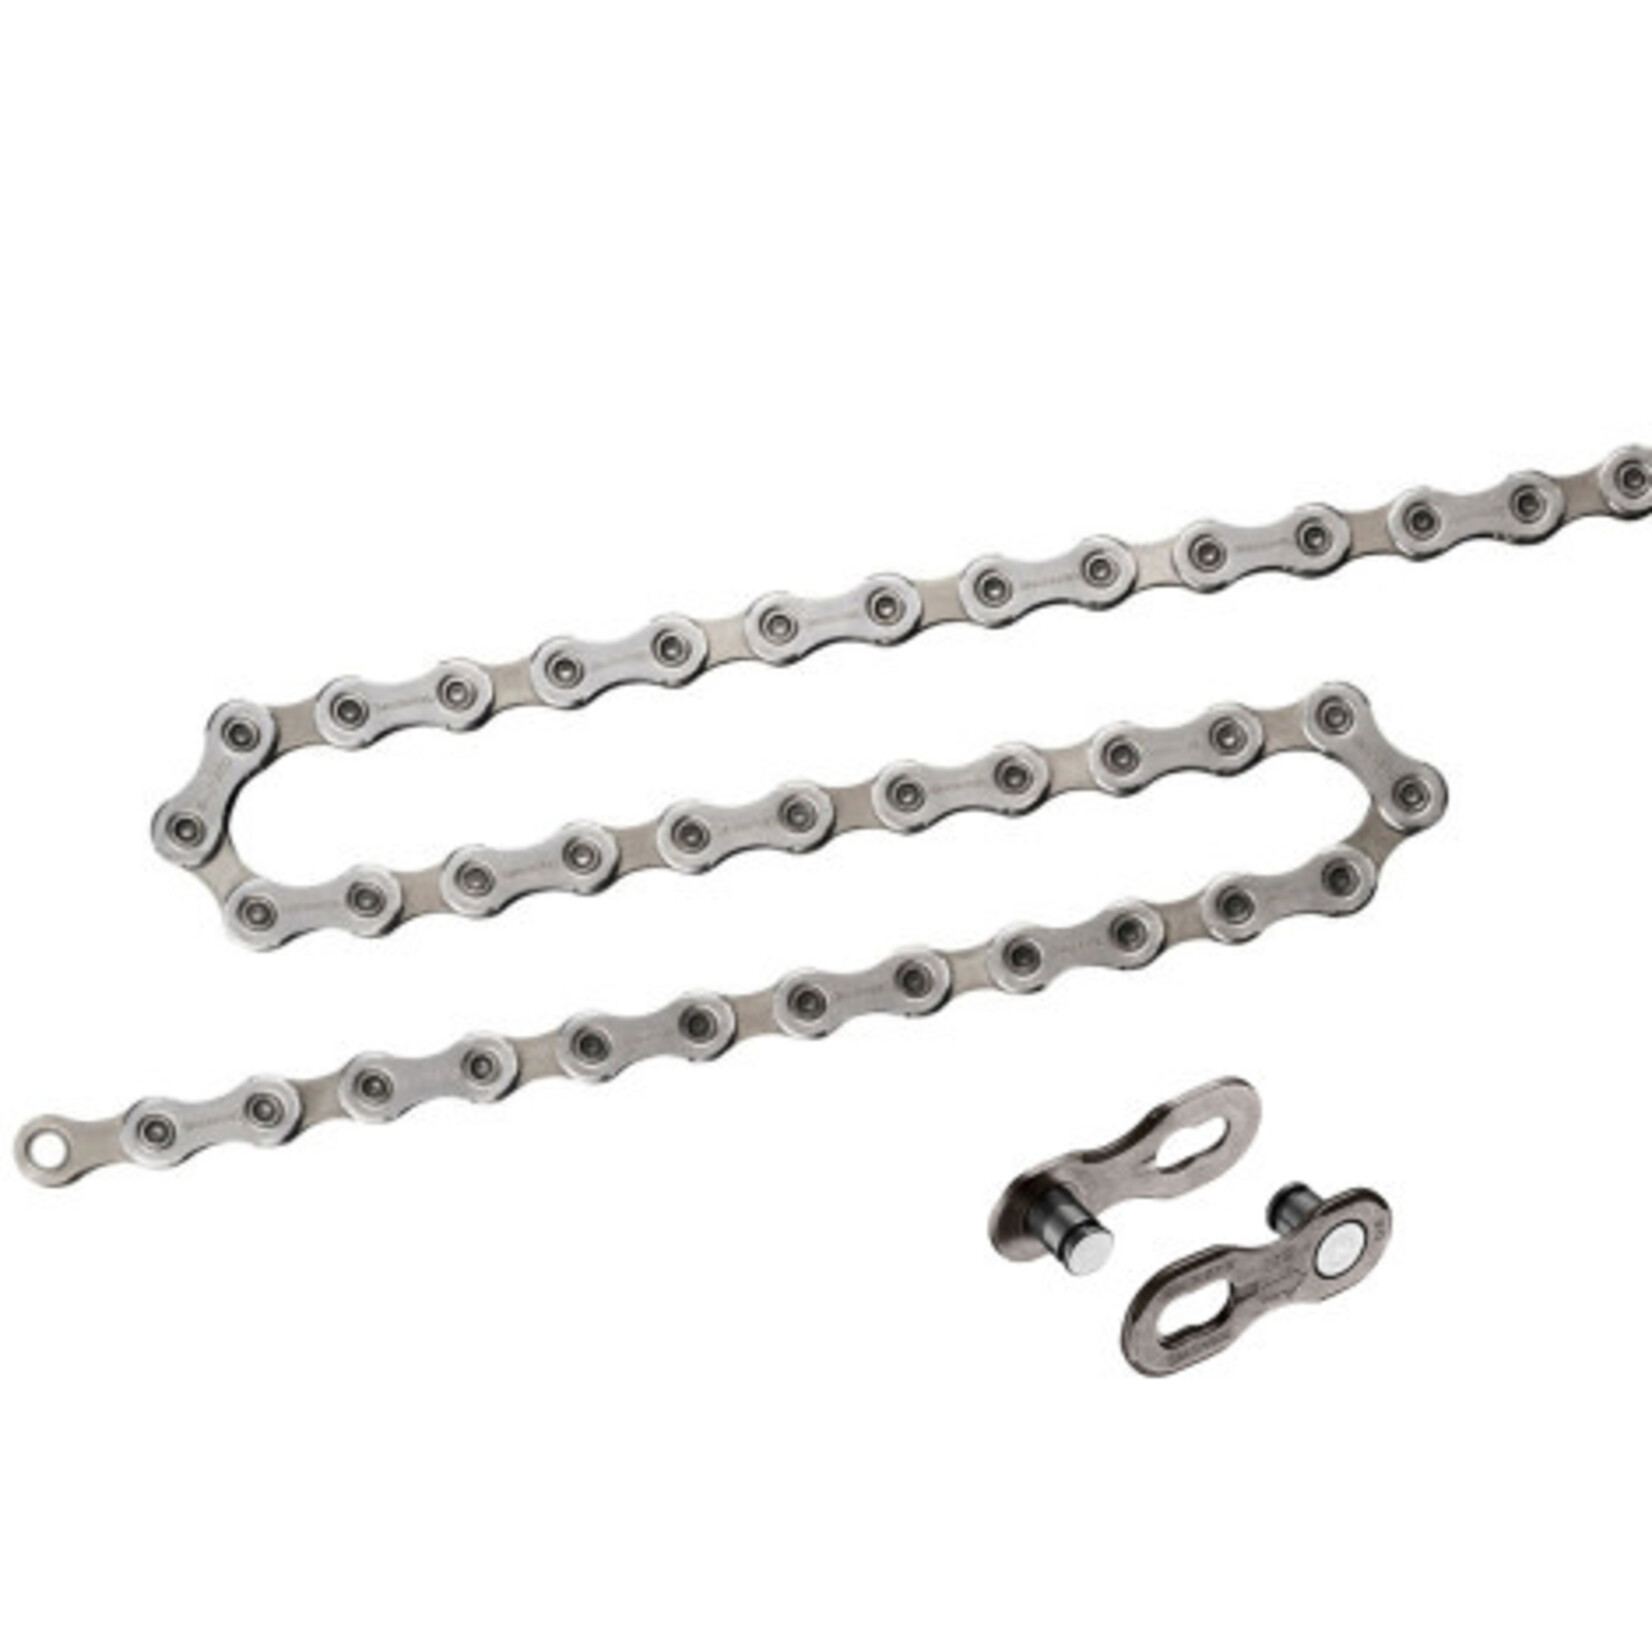 SHIMANO Shimano CN-HG601 105, SLX chain with quick link, 11-speed, 116L, SIL-TEC